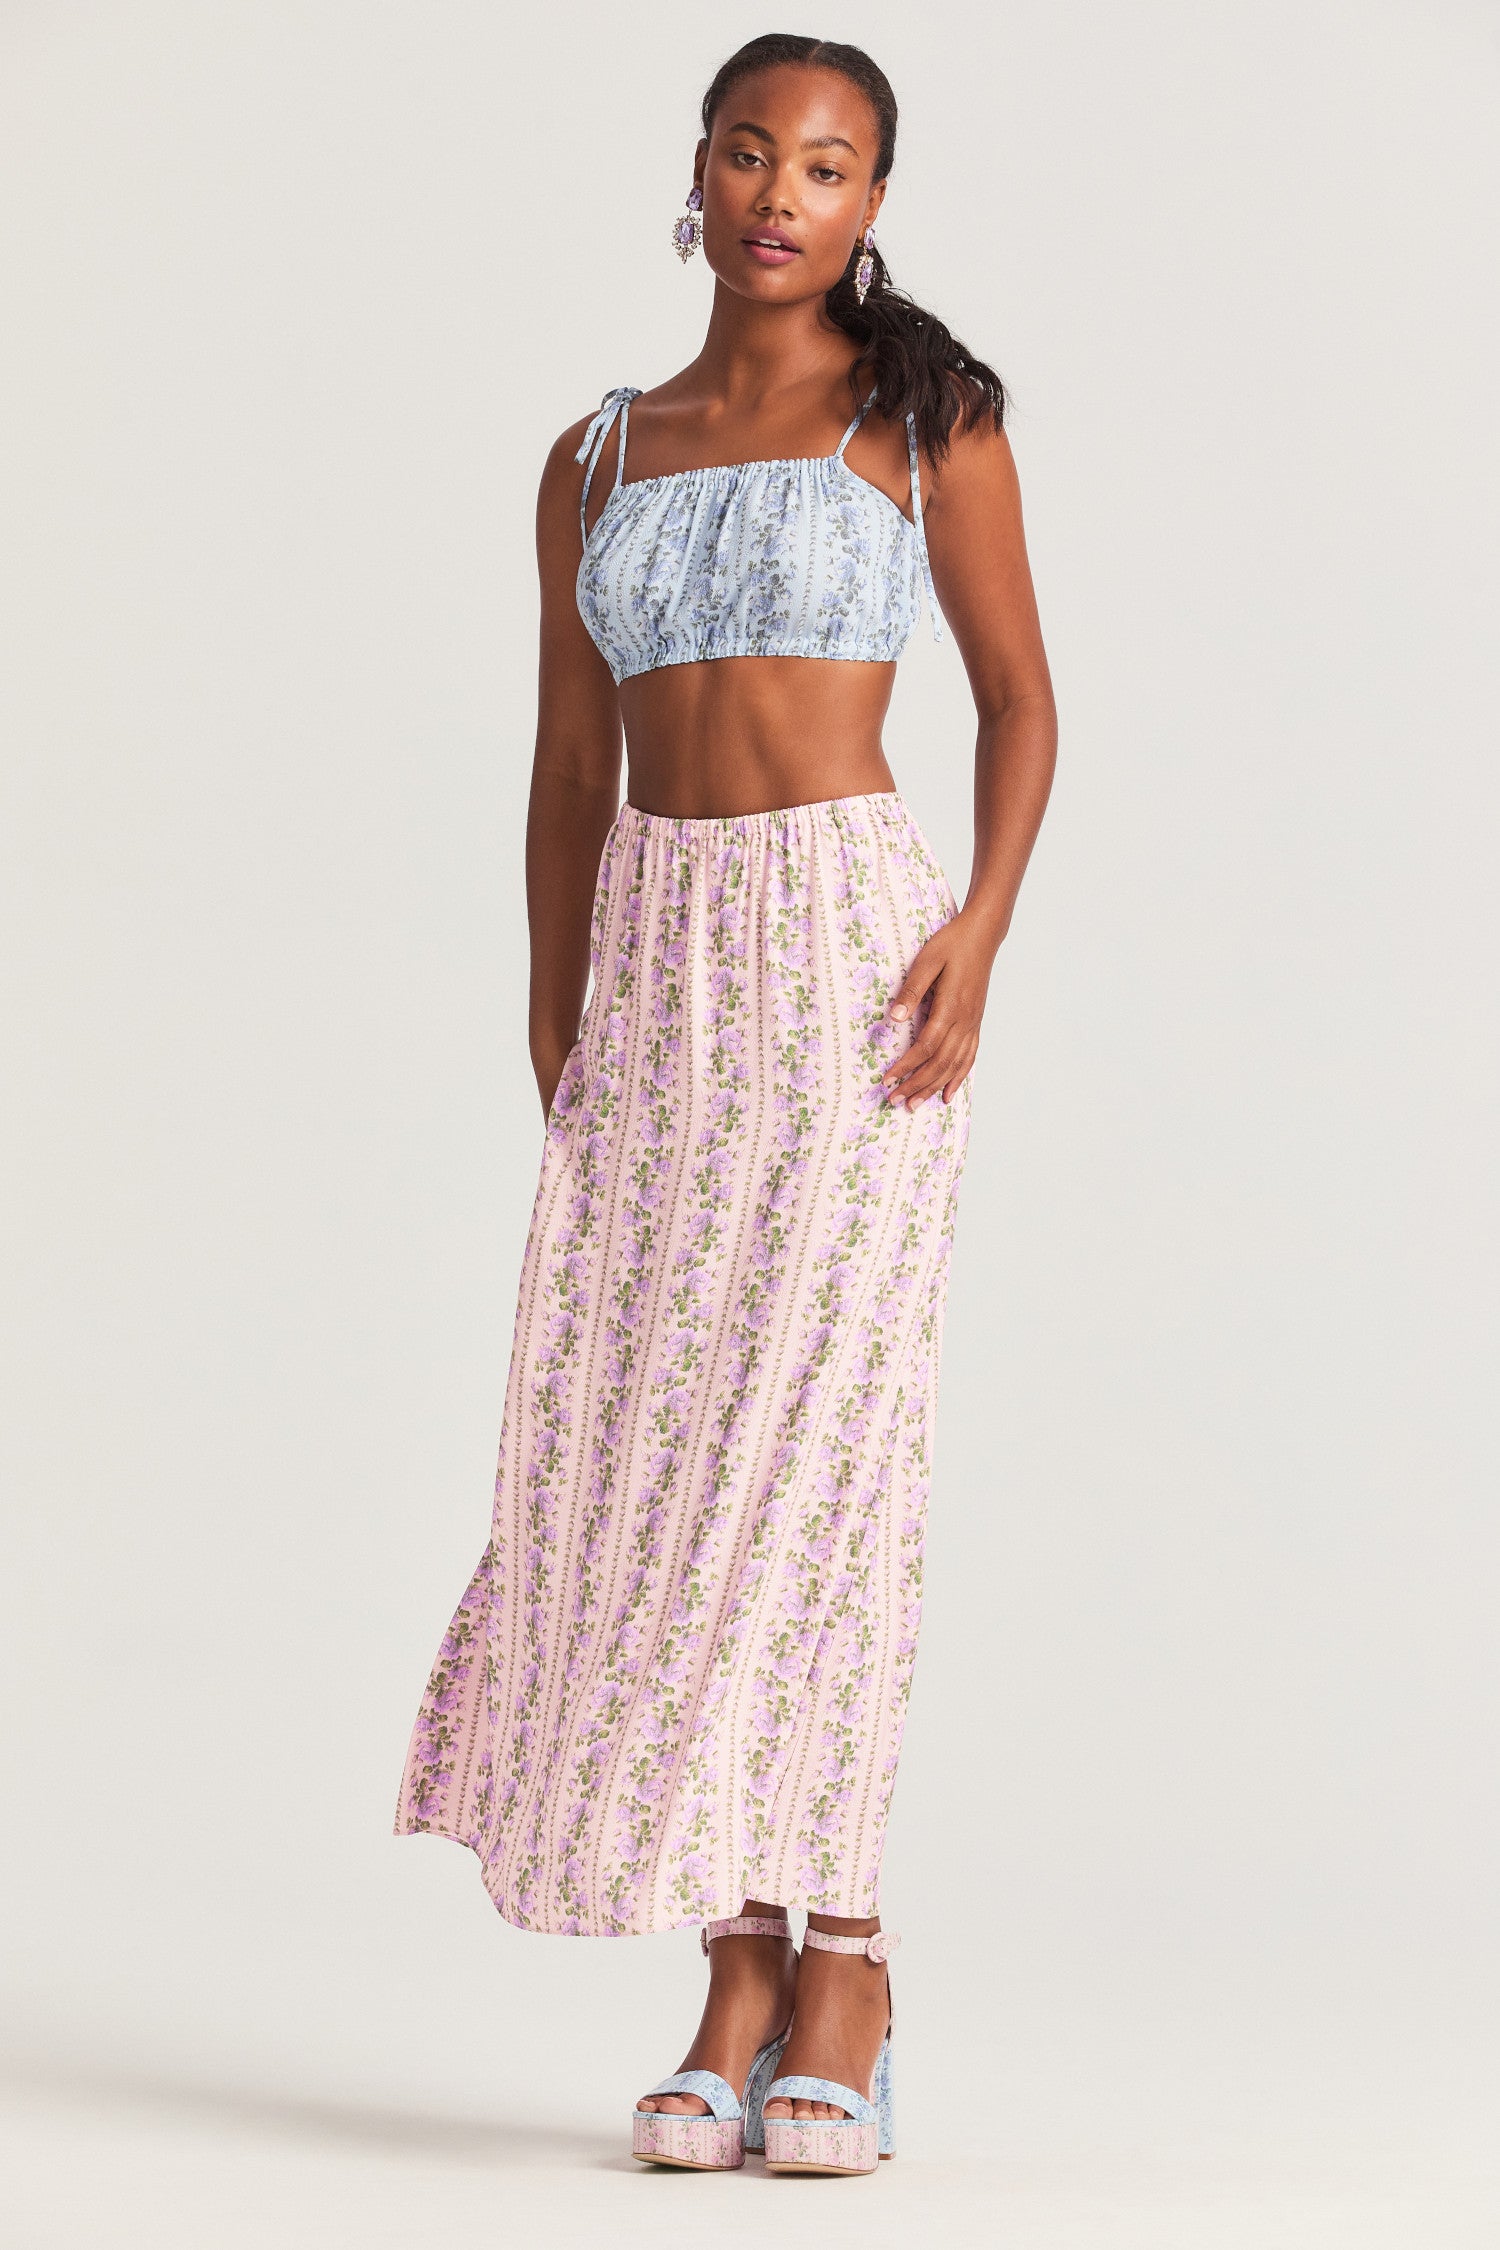 Floral pink midi skirt with crepe fabric. Slim fit with encased elastic at the waist. 